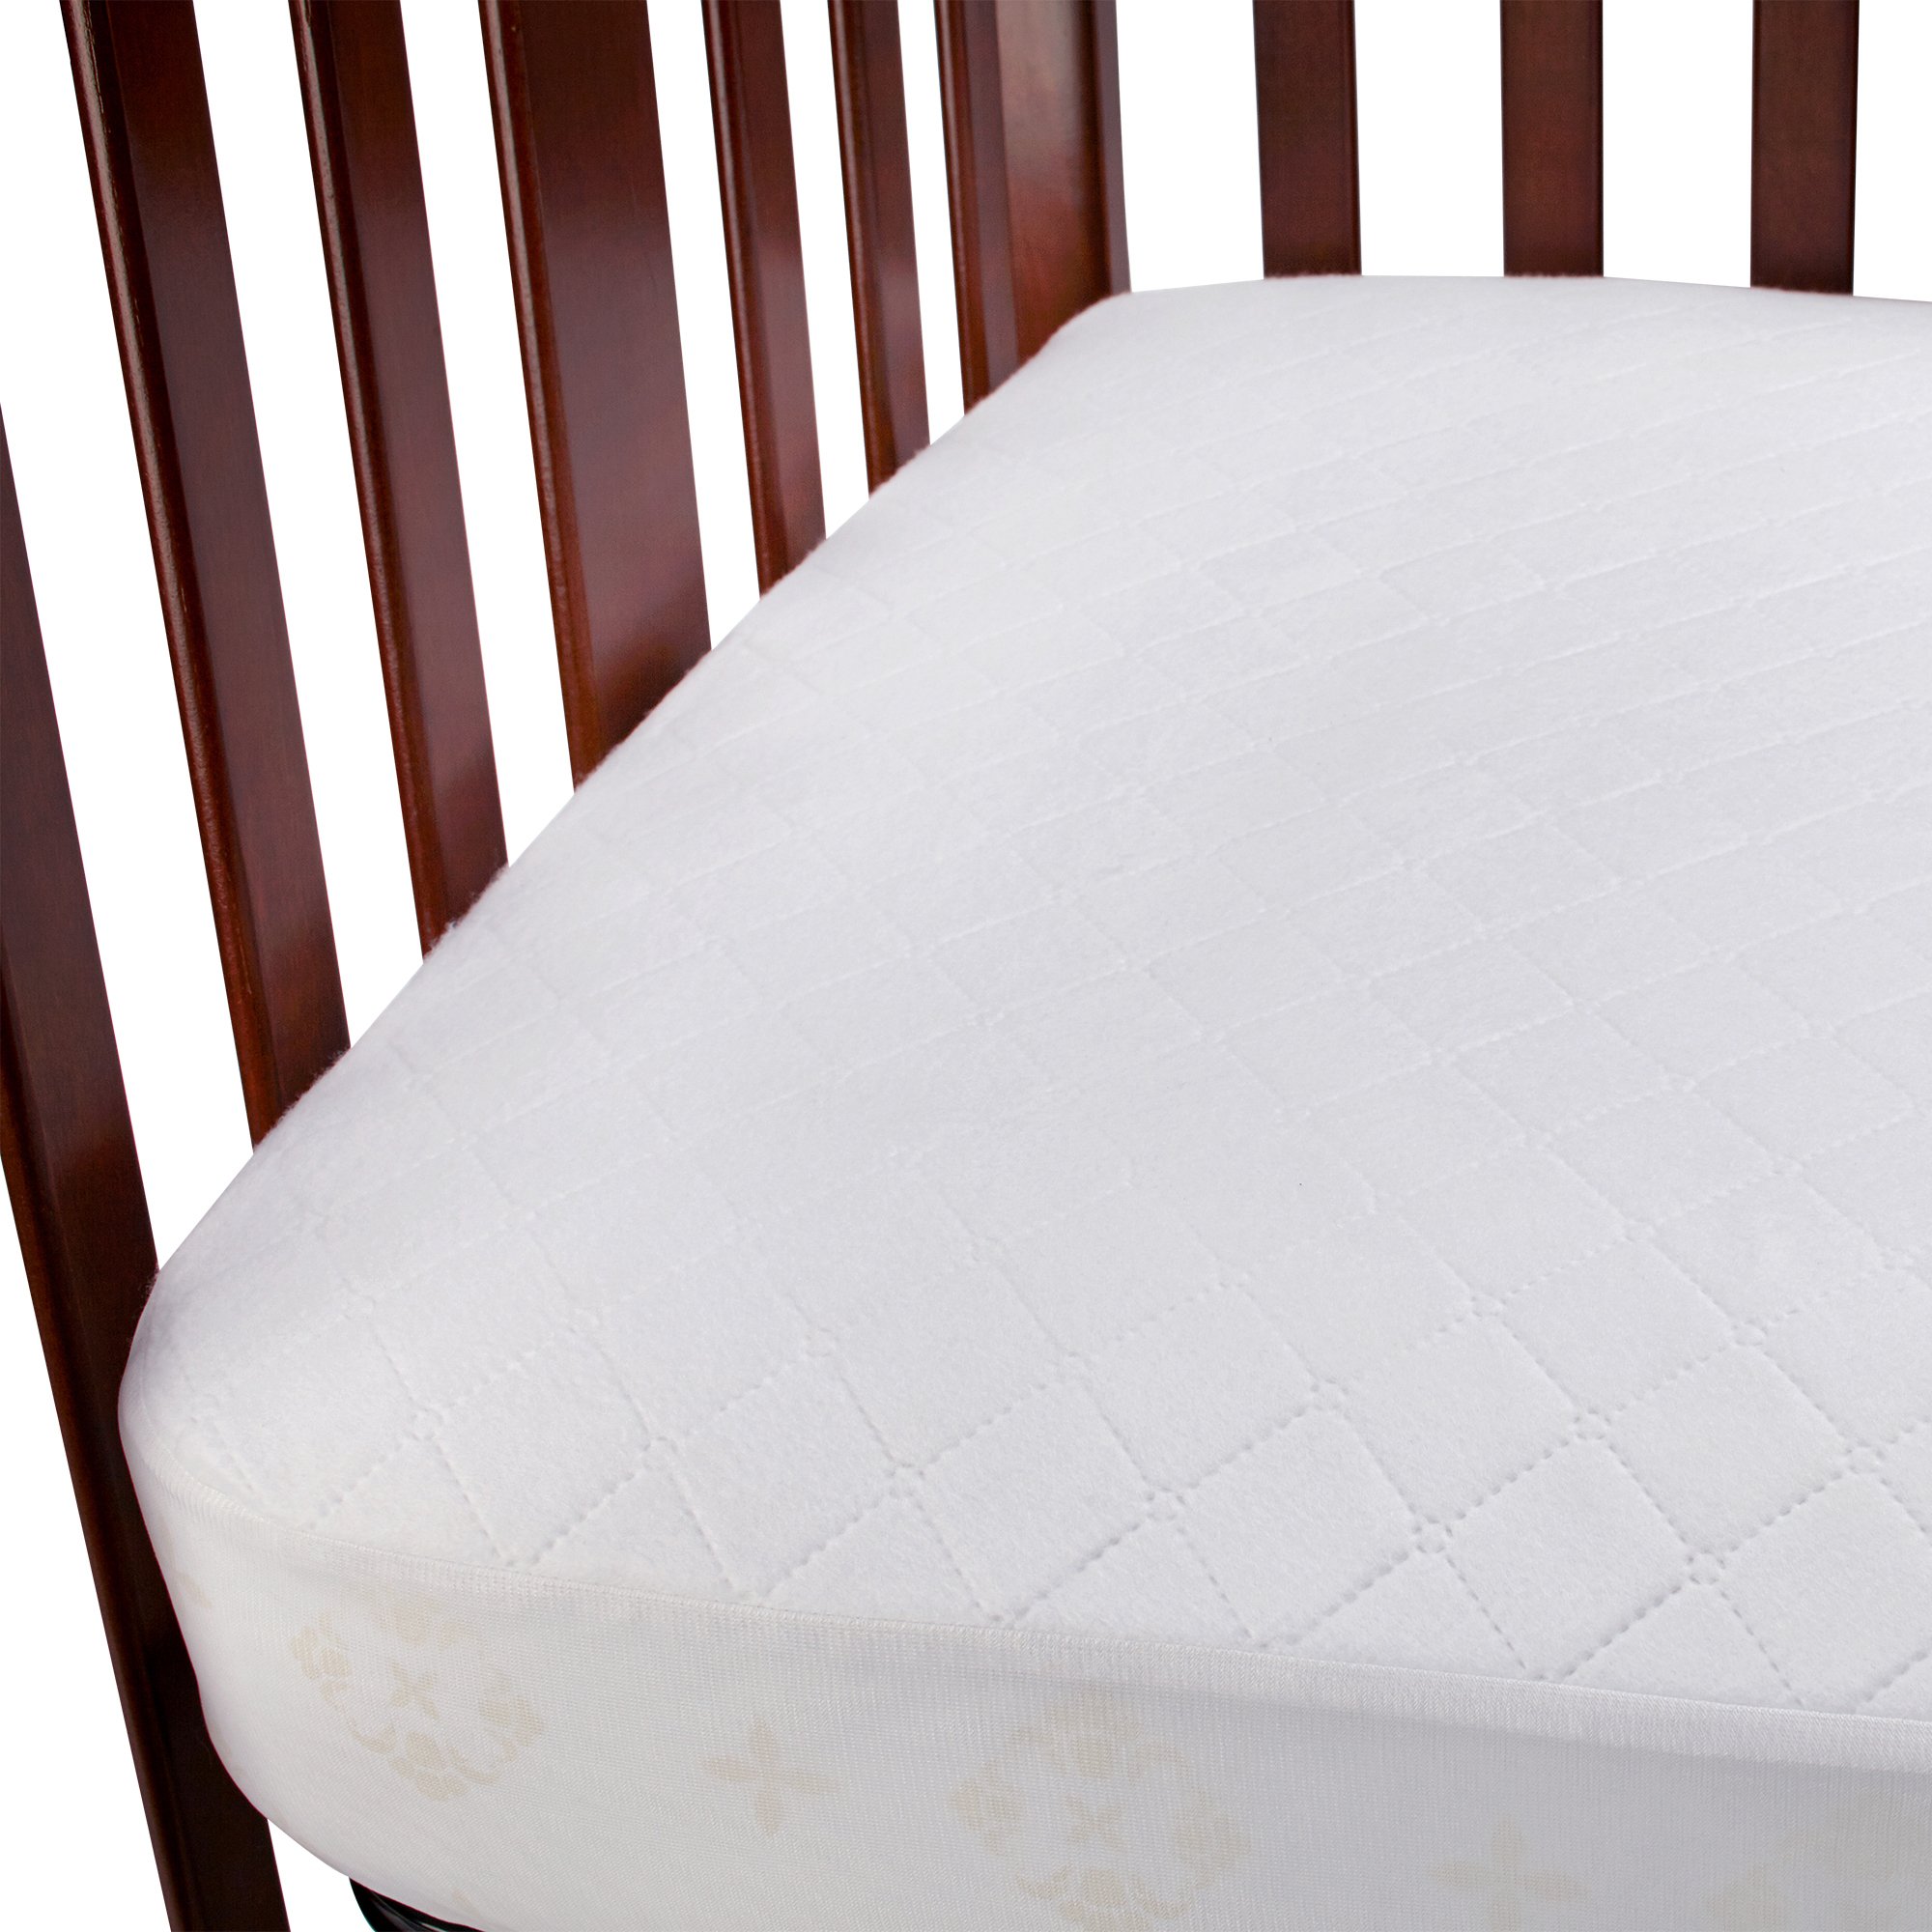 Carters Waterproof Fitted Crib Mattress Pad and Toddler Crib Mattress Protector - Baby Crib Mattress Cover - Protective Sheet for Boys and Girls Bedding Sets White